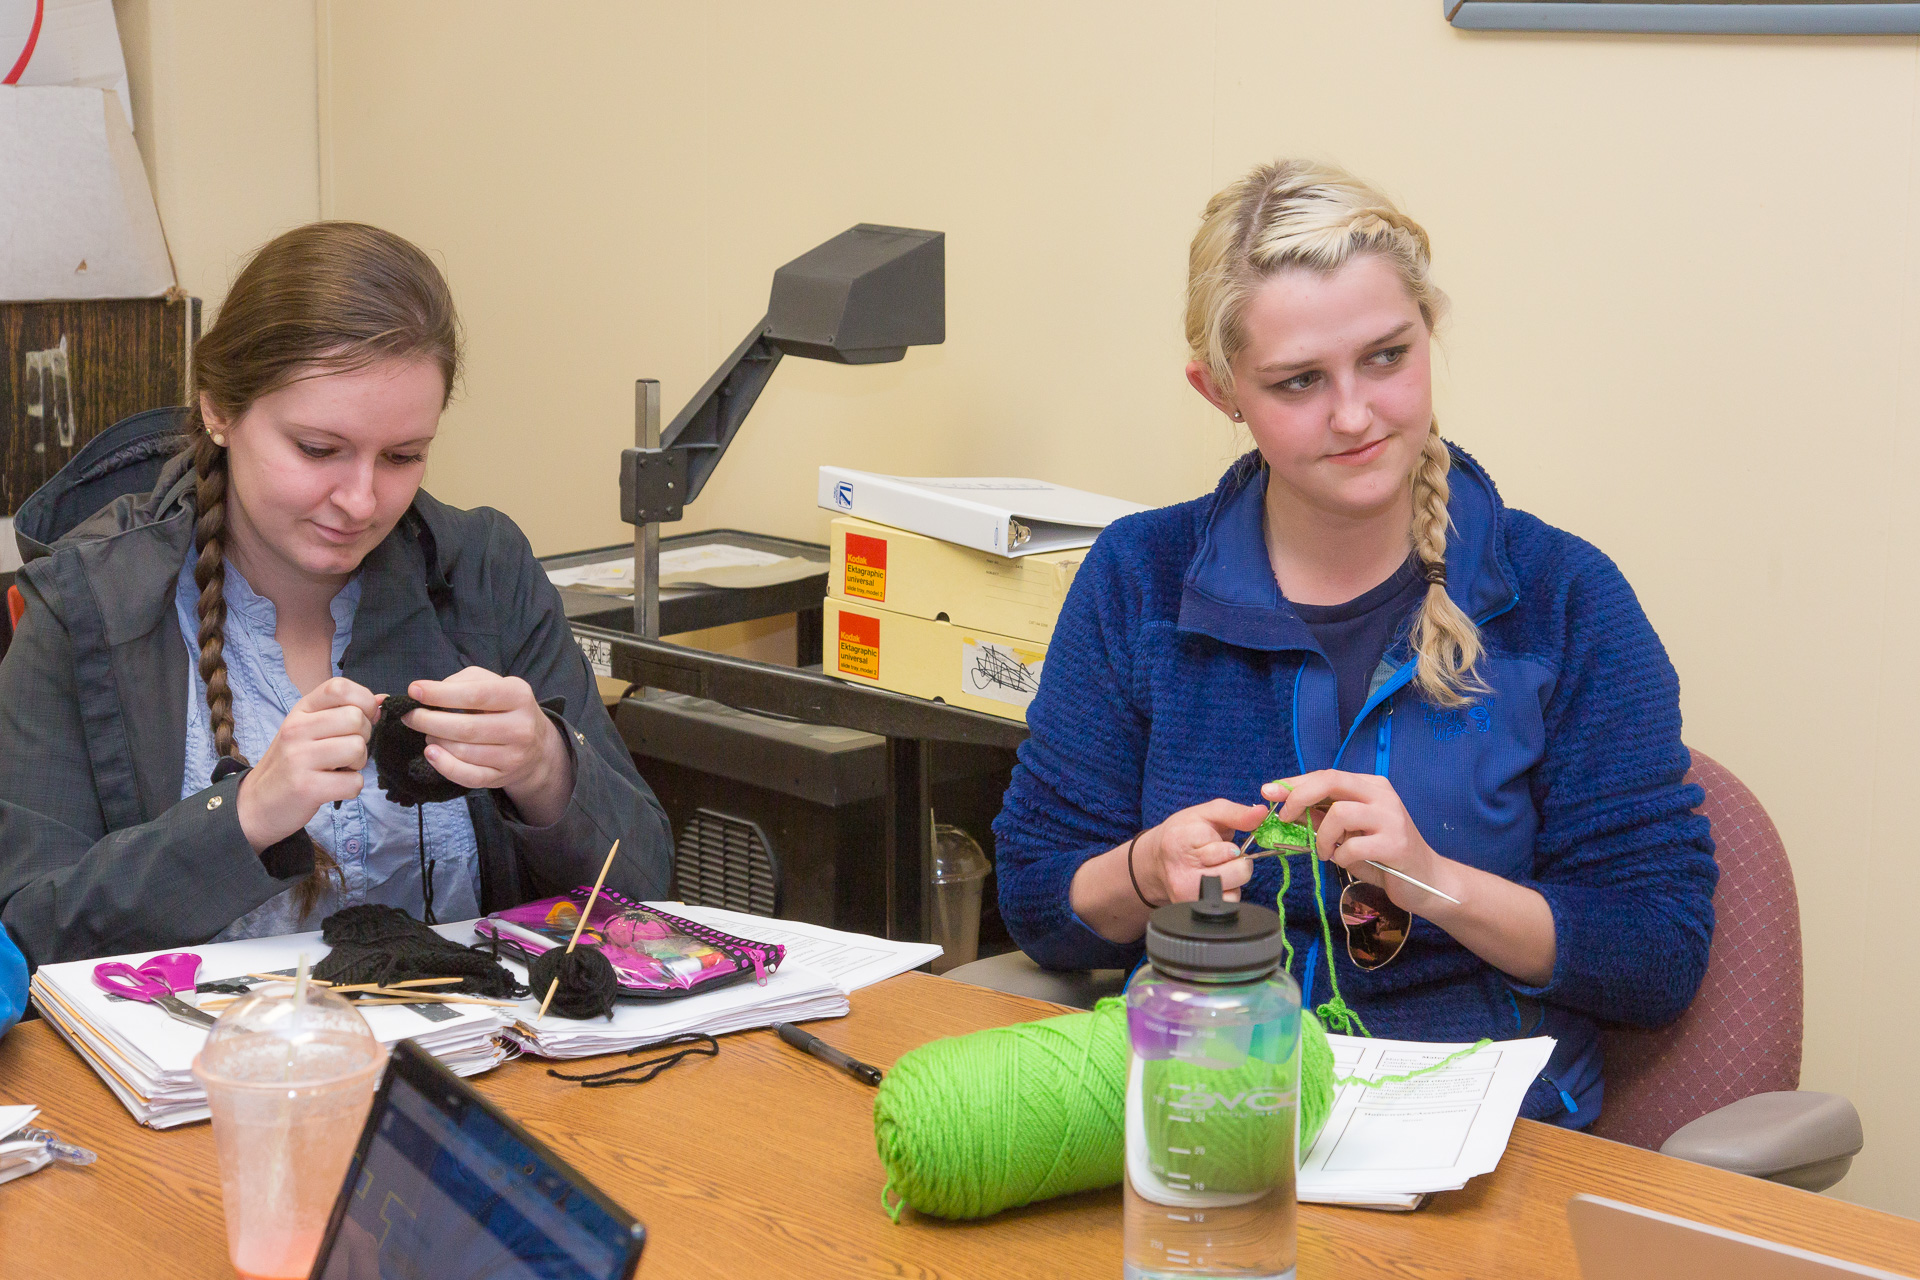 Claire Ashmead, left, and Michelle Strehl knit gloves for a customer with a unique hand shape. Strehl, whose own right hand was damaged when she was a child, began creating such gloves in 2013.